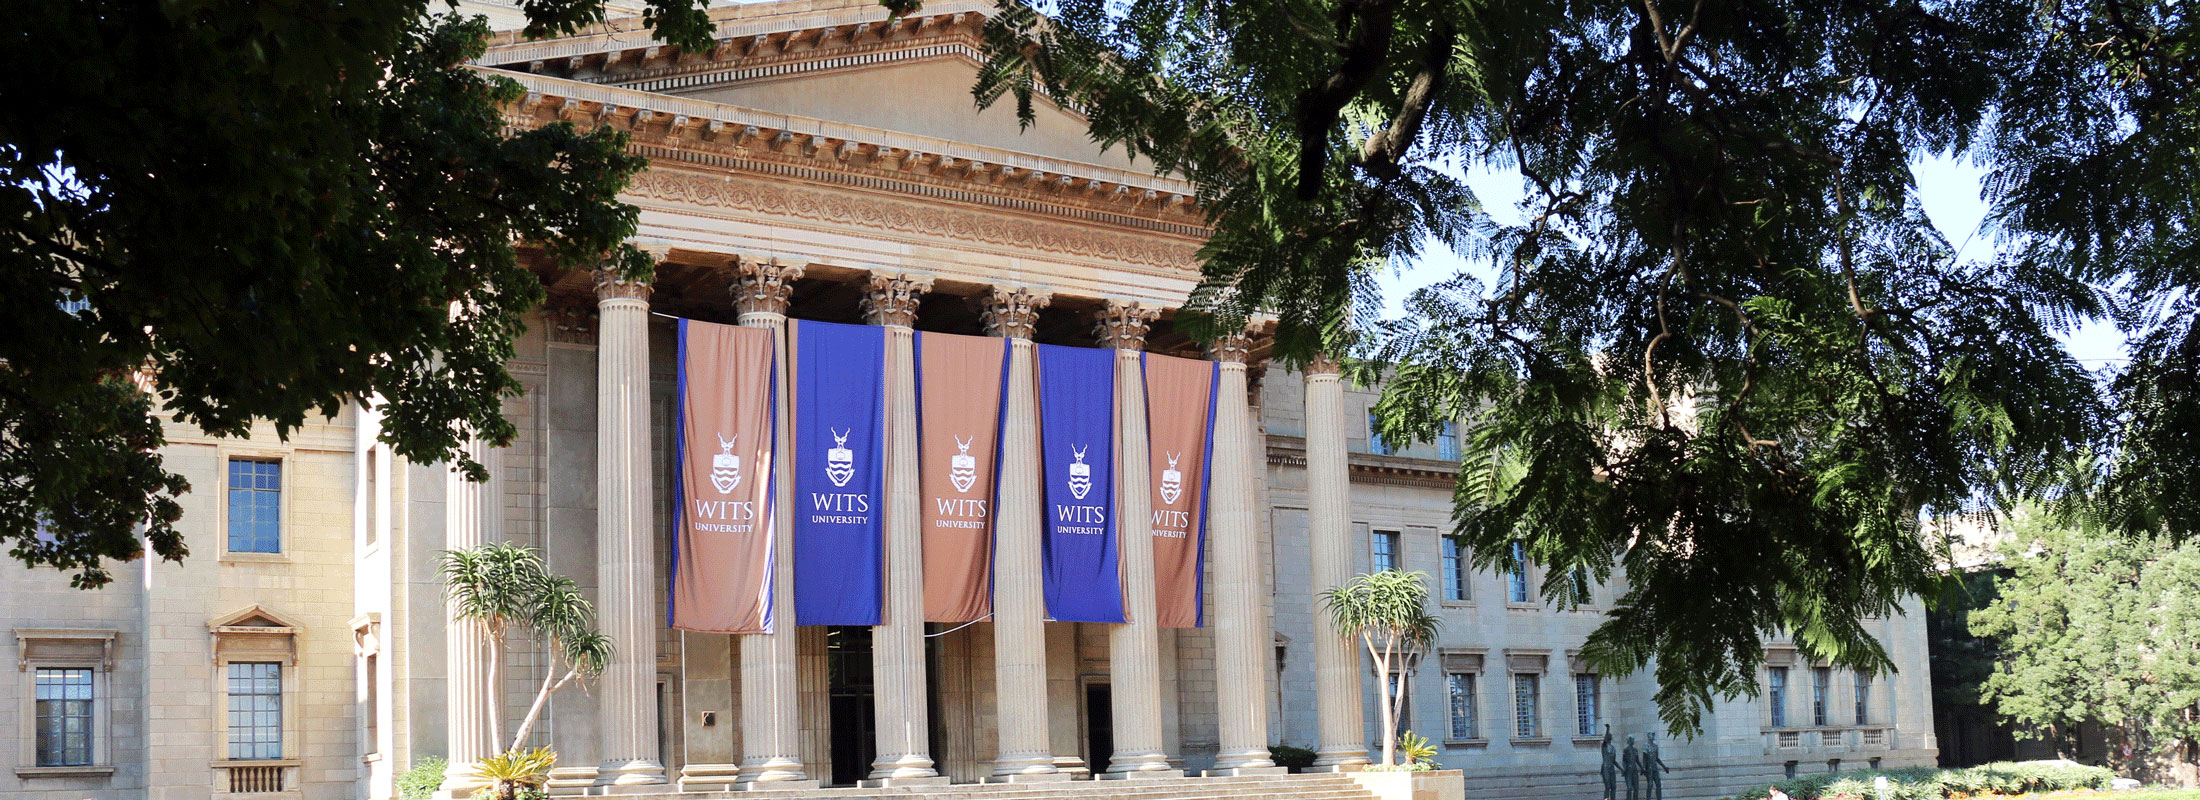 Wits Great Hall with blue and gold banners